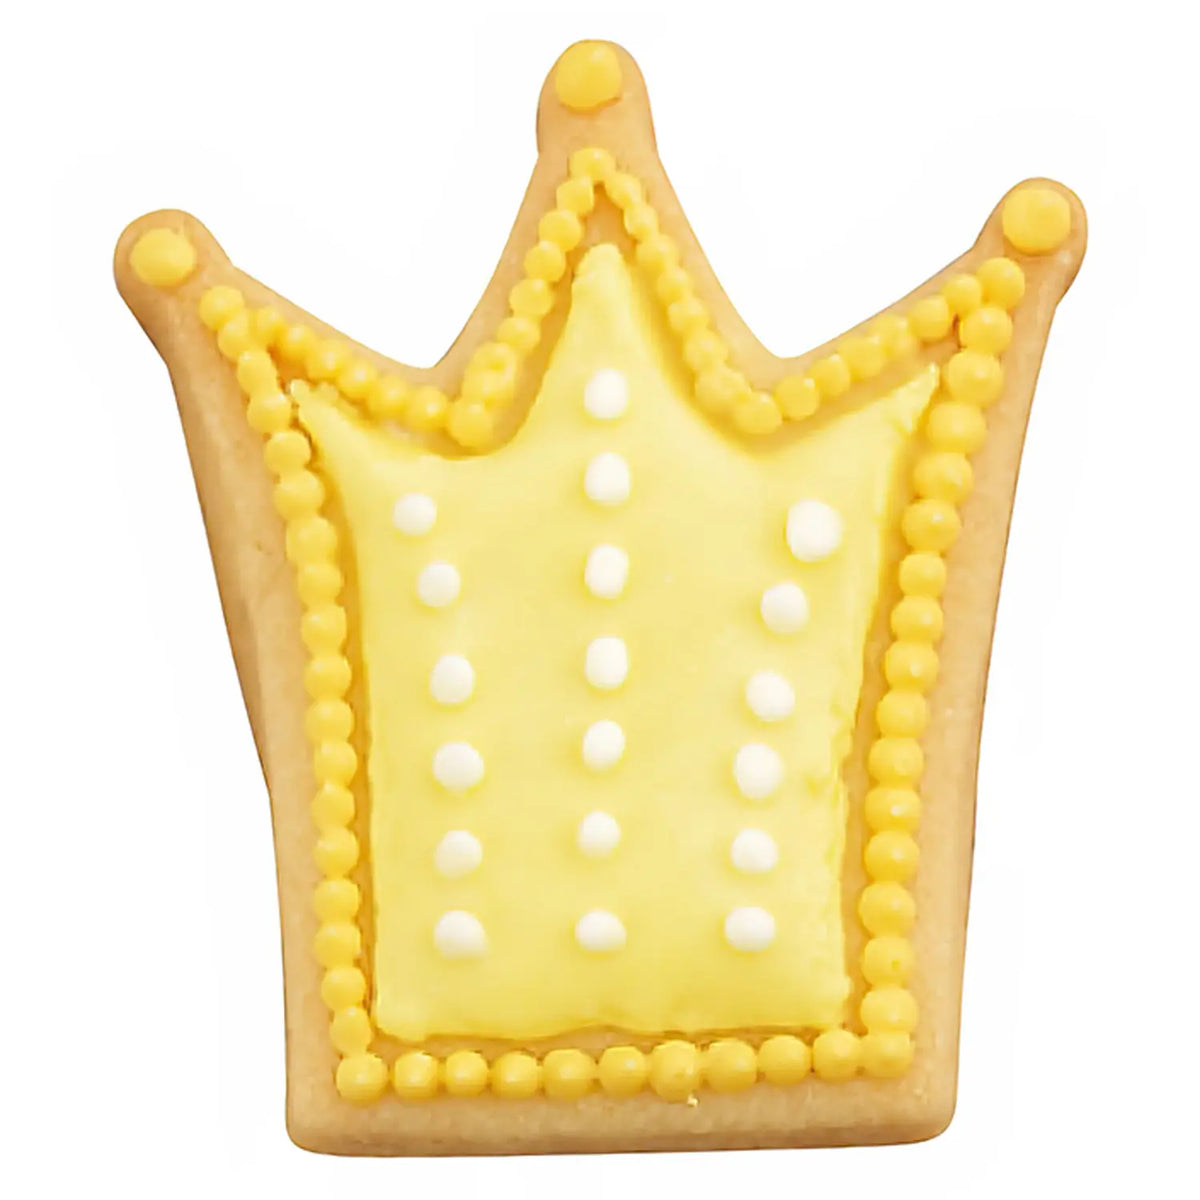 TIGERCROWN Cake Land Stainless Steel Cookie Cutter Crown